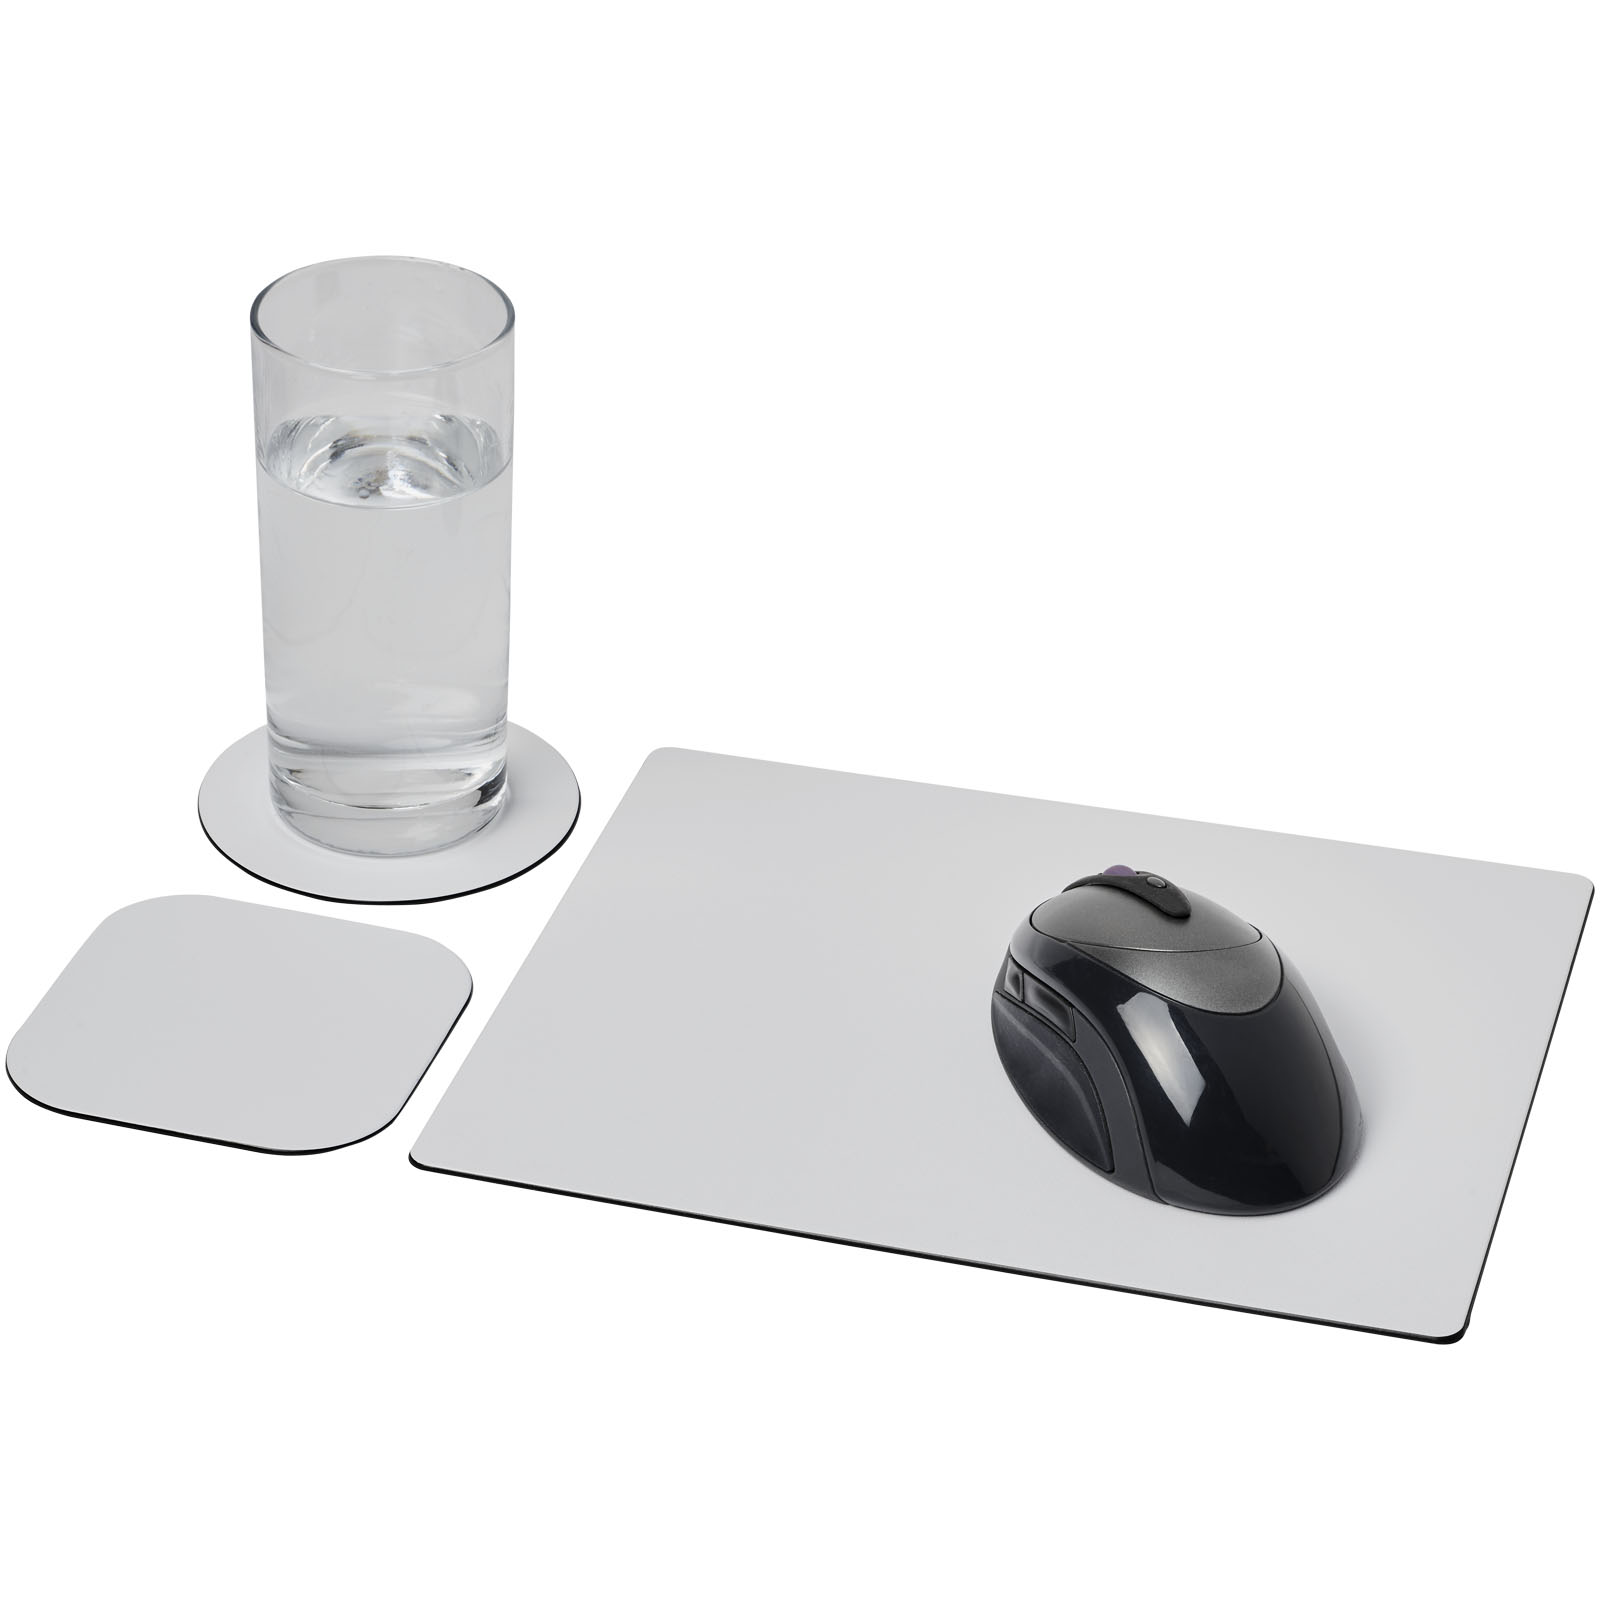 Advertising Computer Accessories - Brite-Mat® mouse mat and coaster set combo 1